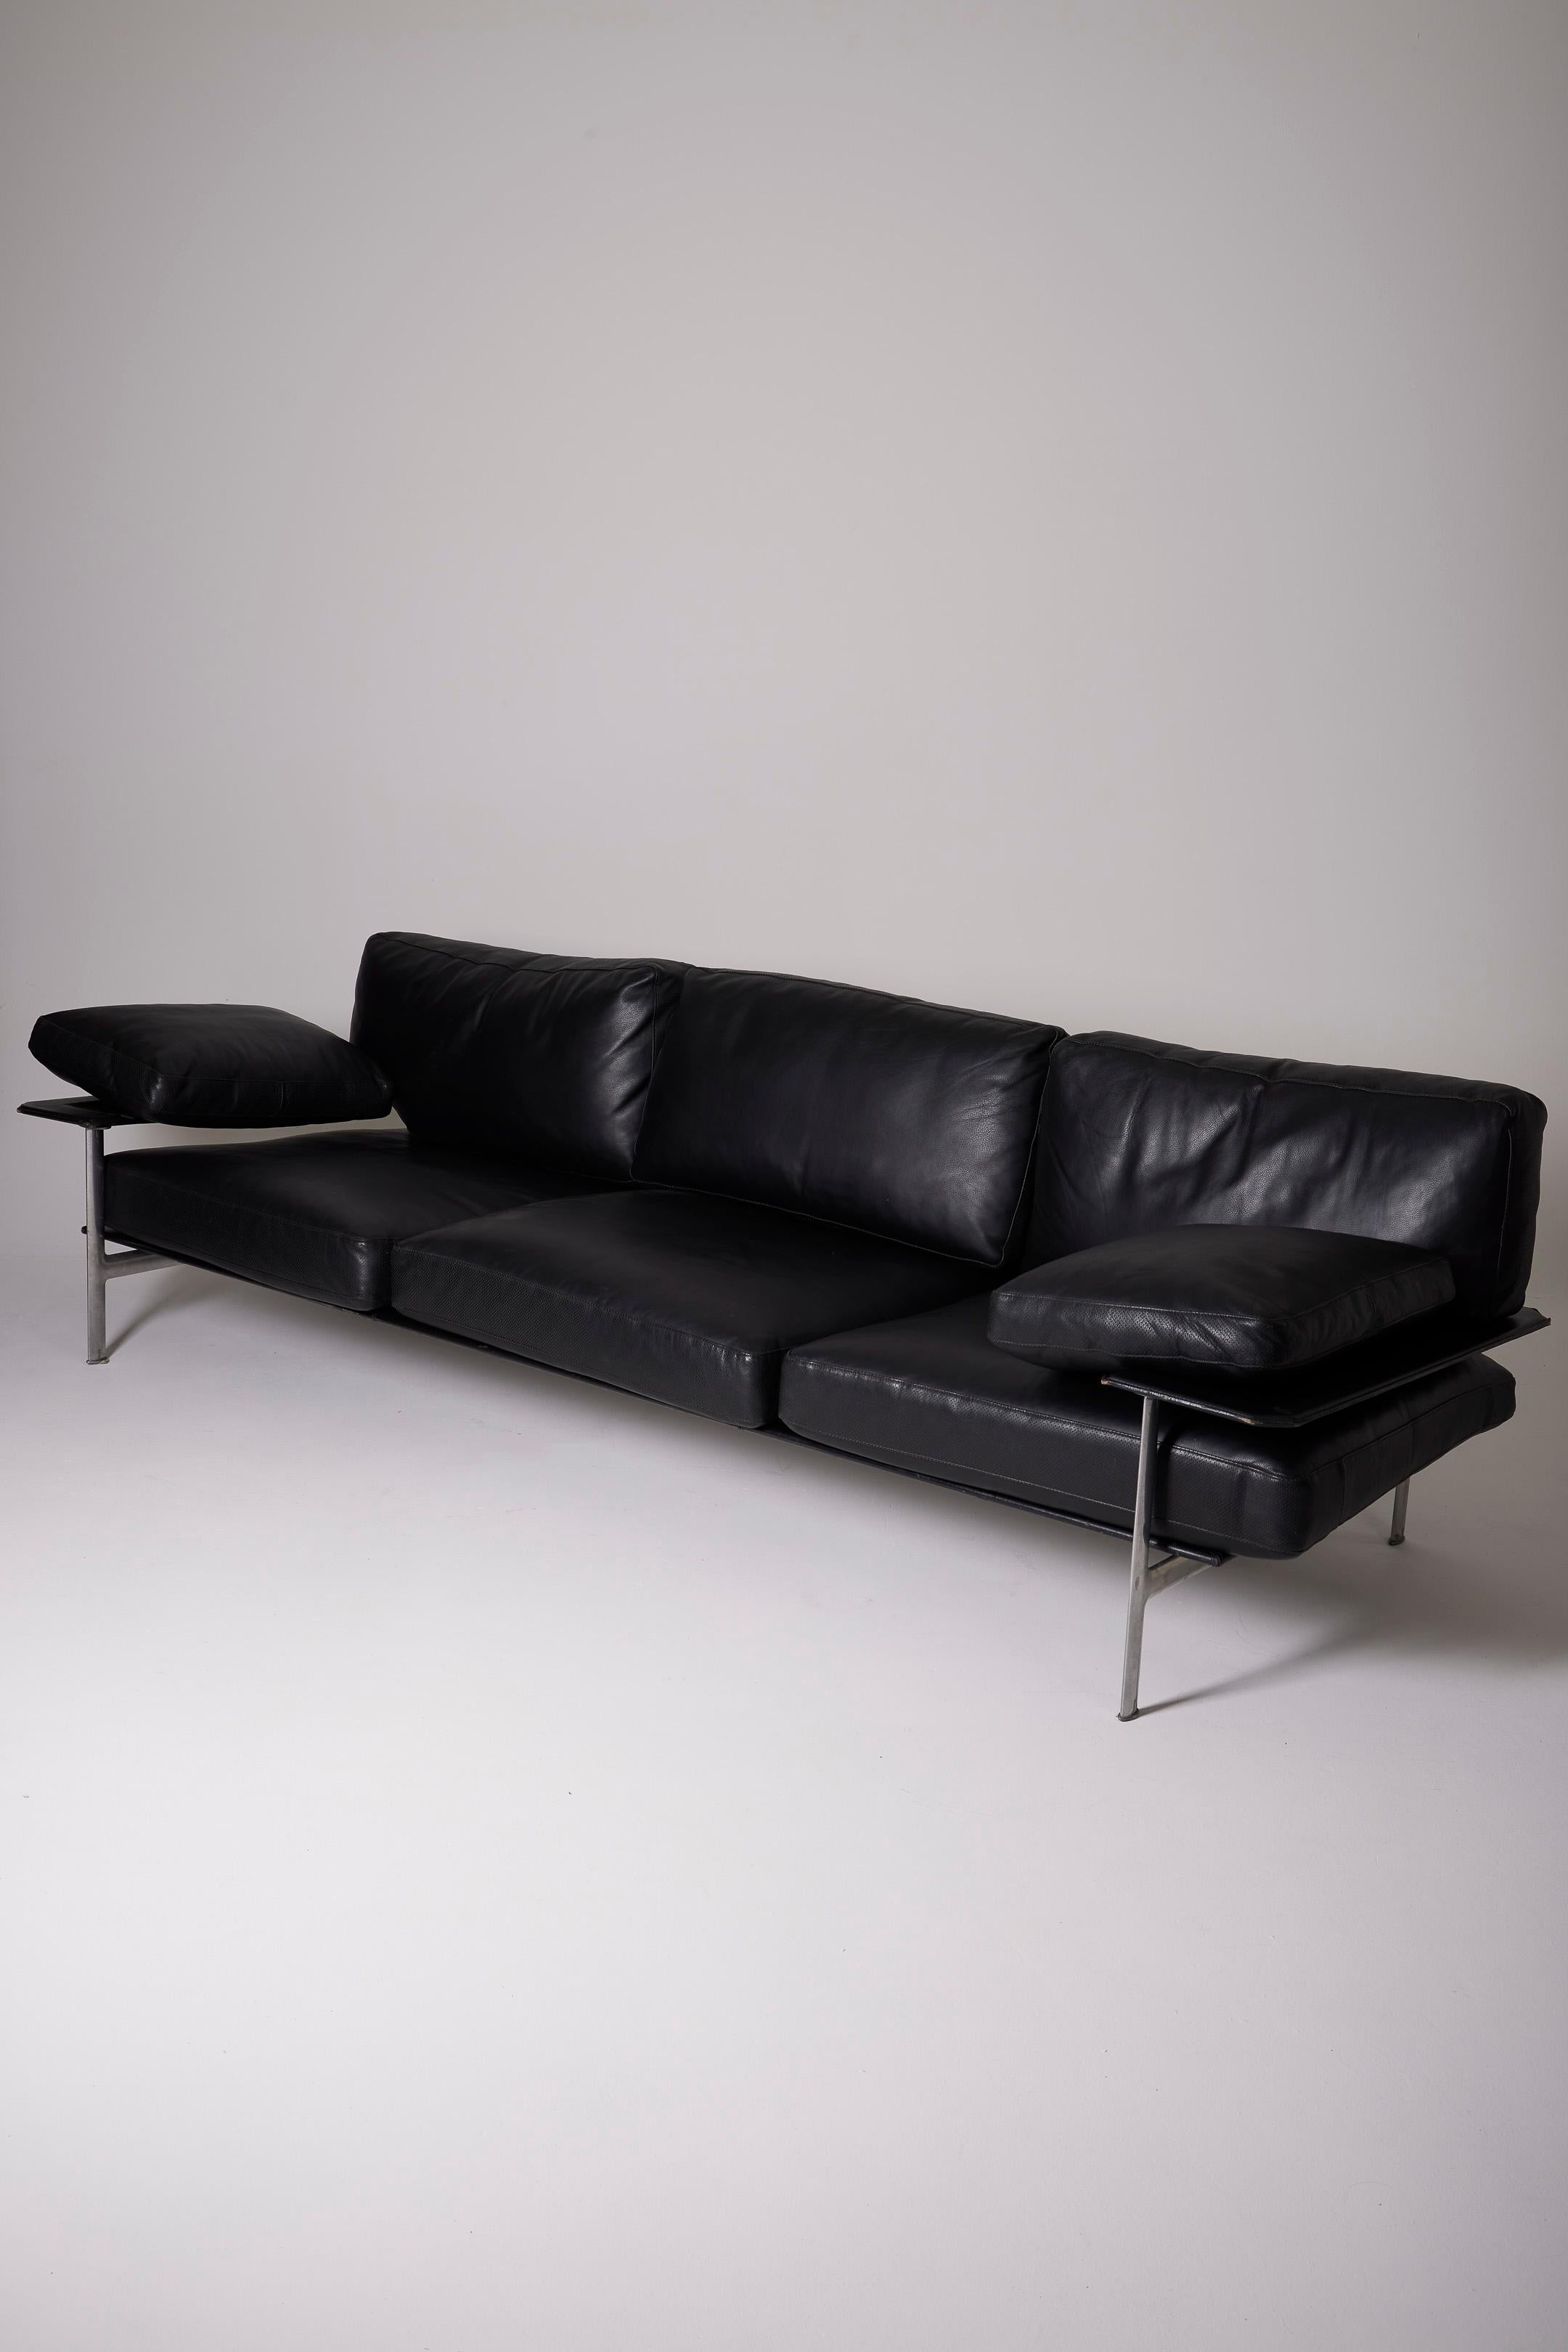 3 or 4-seater sofa model 'Dieses' in black leather by designers Antonio Citterio (1950-) & Paolo Nava (1943-) for B&B Italia. The structure is in metal and the covering in original black leather. Good condition.
DV617